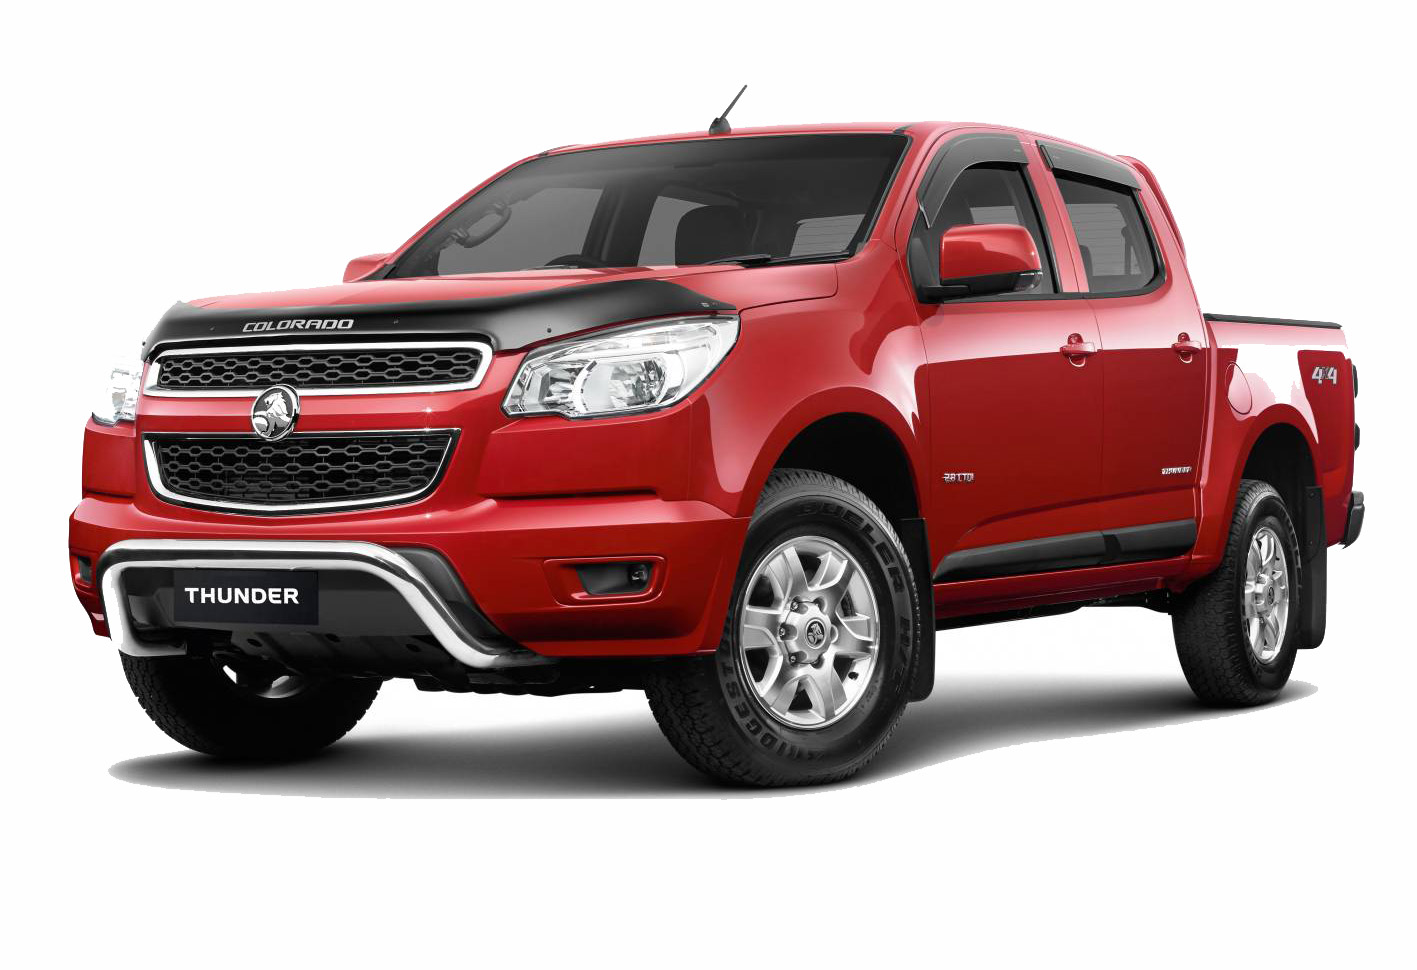 Holden Colorado Thunder special edition brings added value